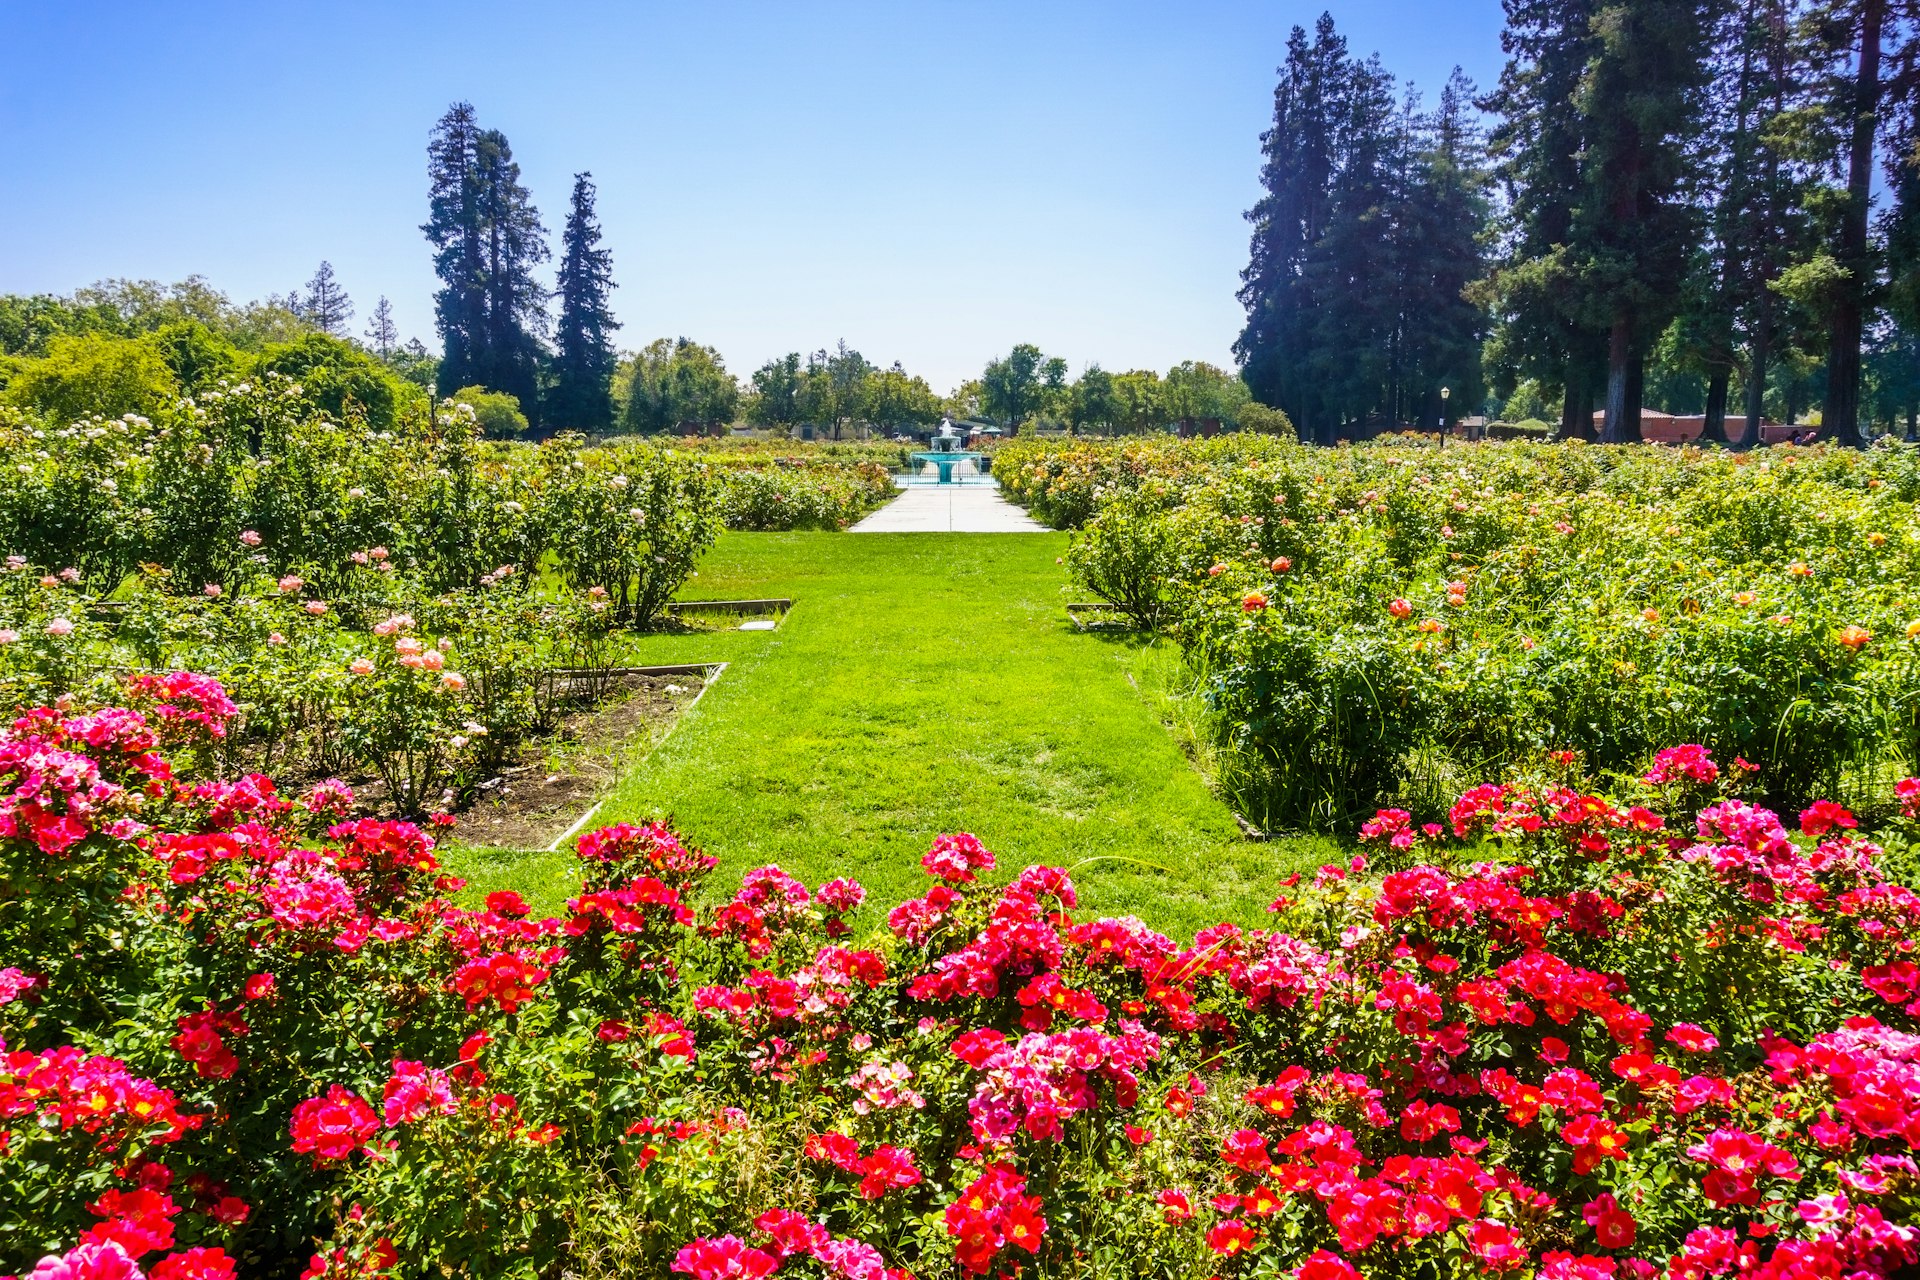 A vast landscaped garden with flower beds packed with rose bushes on a sunny day 